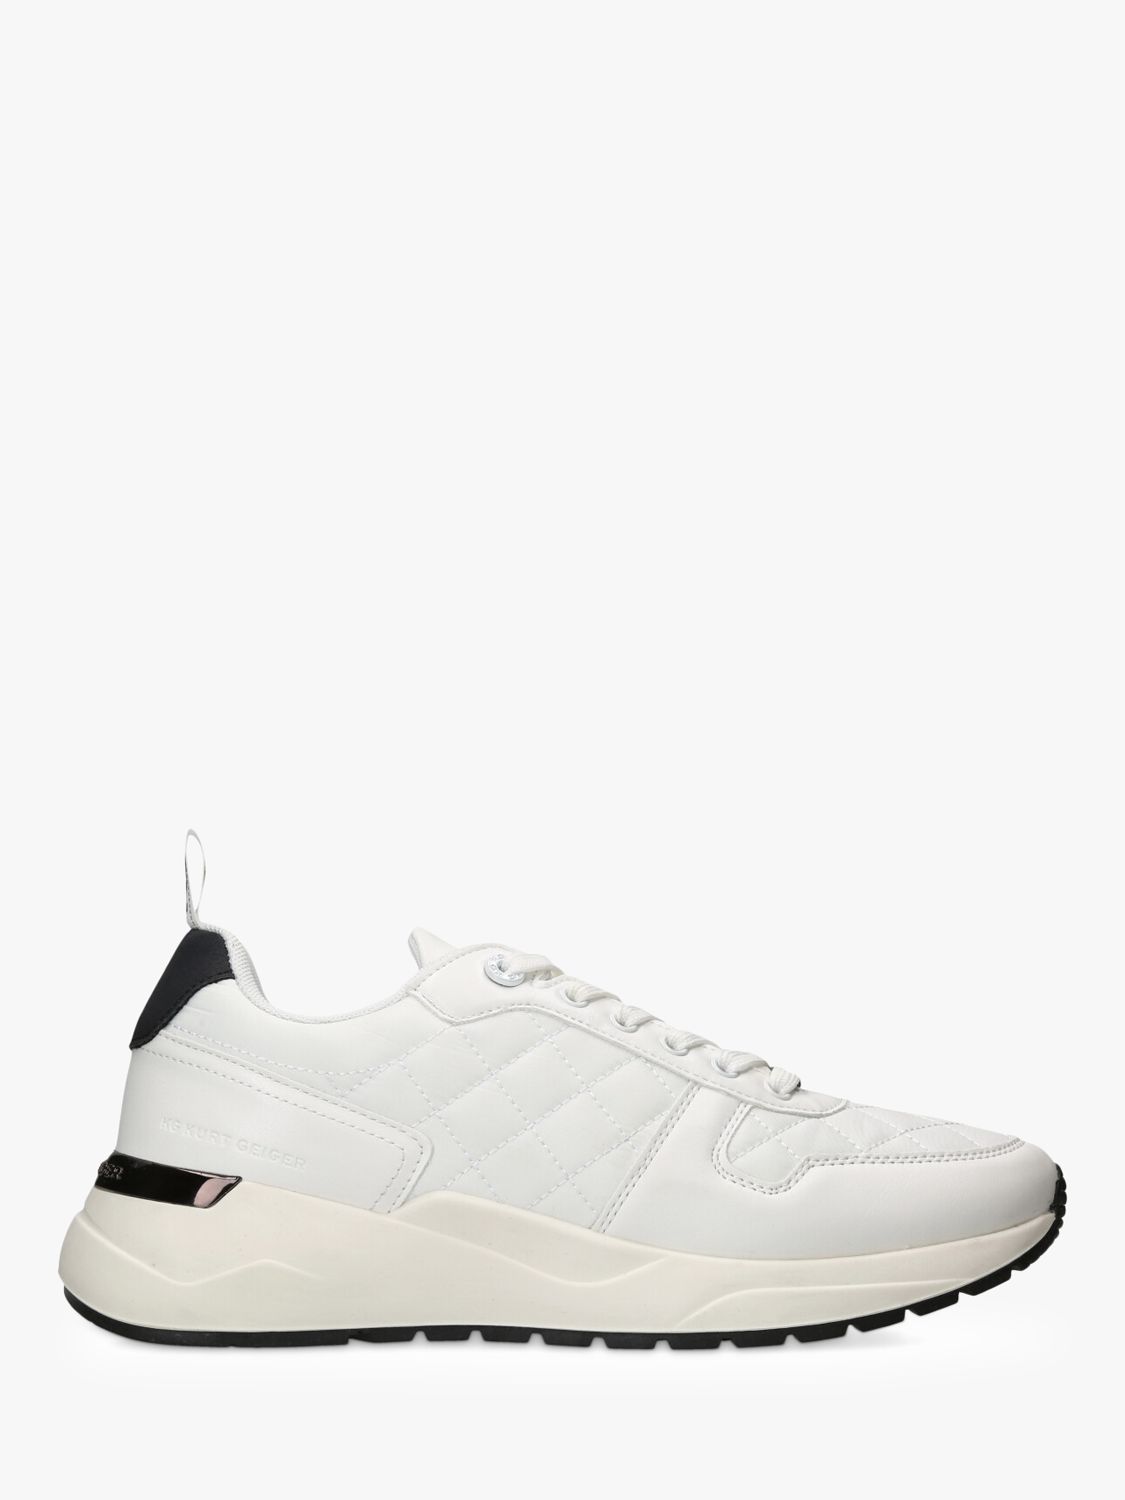 KG Kurt Geiger Kofi Quilted Trainers, White at John Lewis & Partners